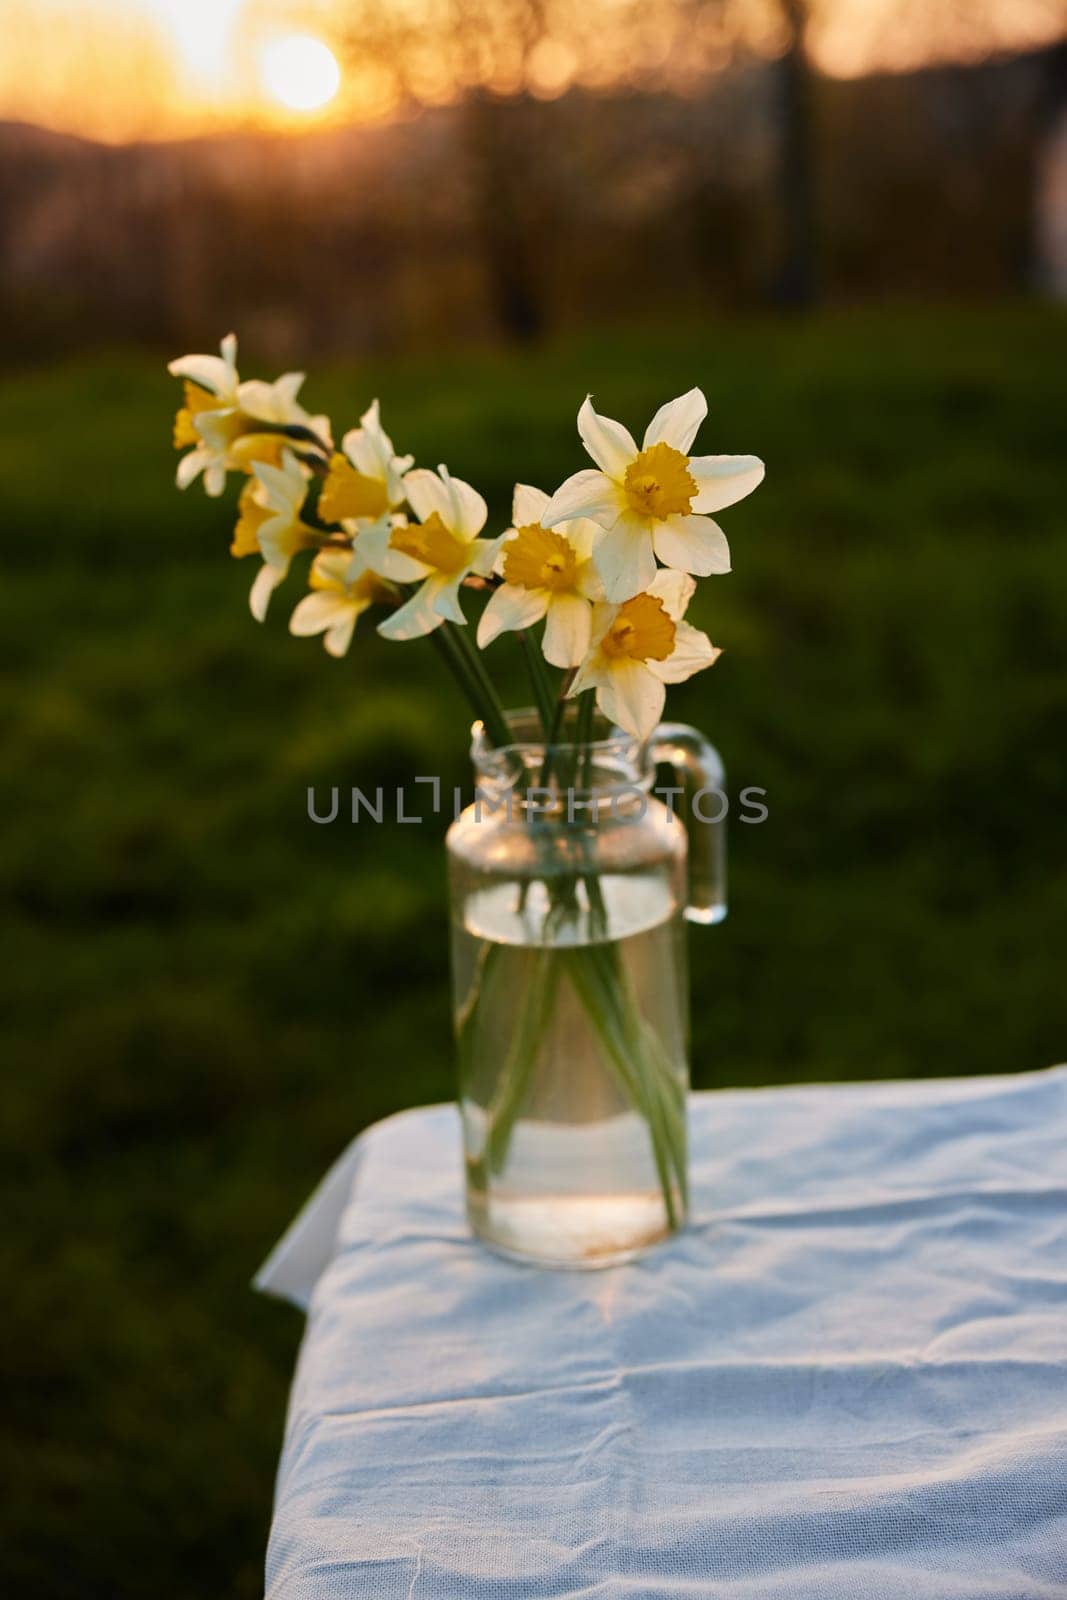 aesthetic photograph of daffodil bouquets standing on a street table by Vichizh